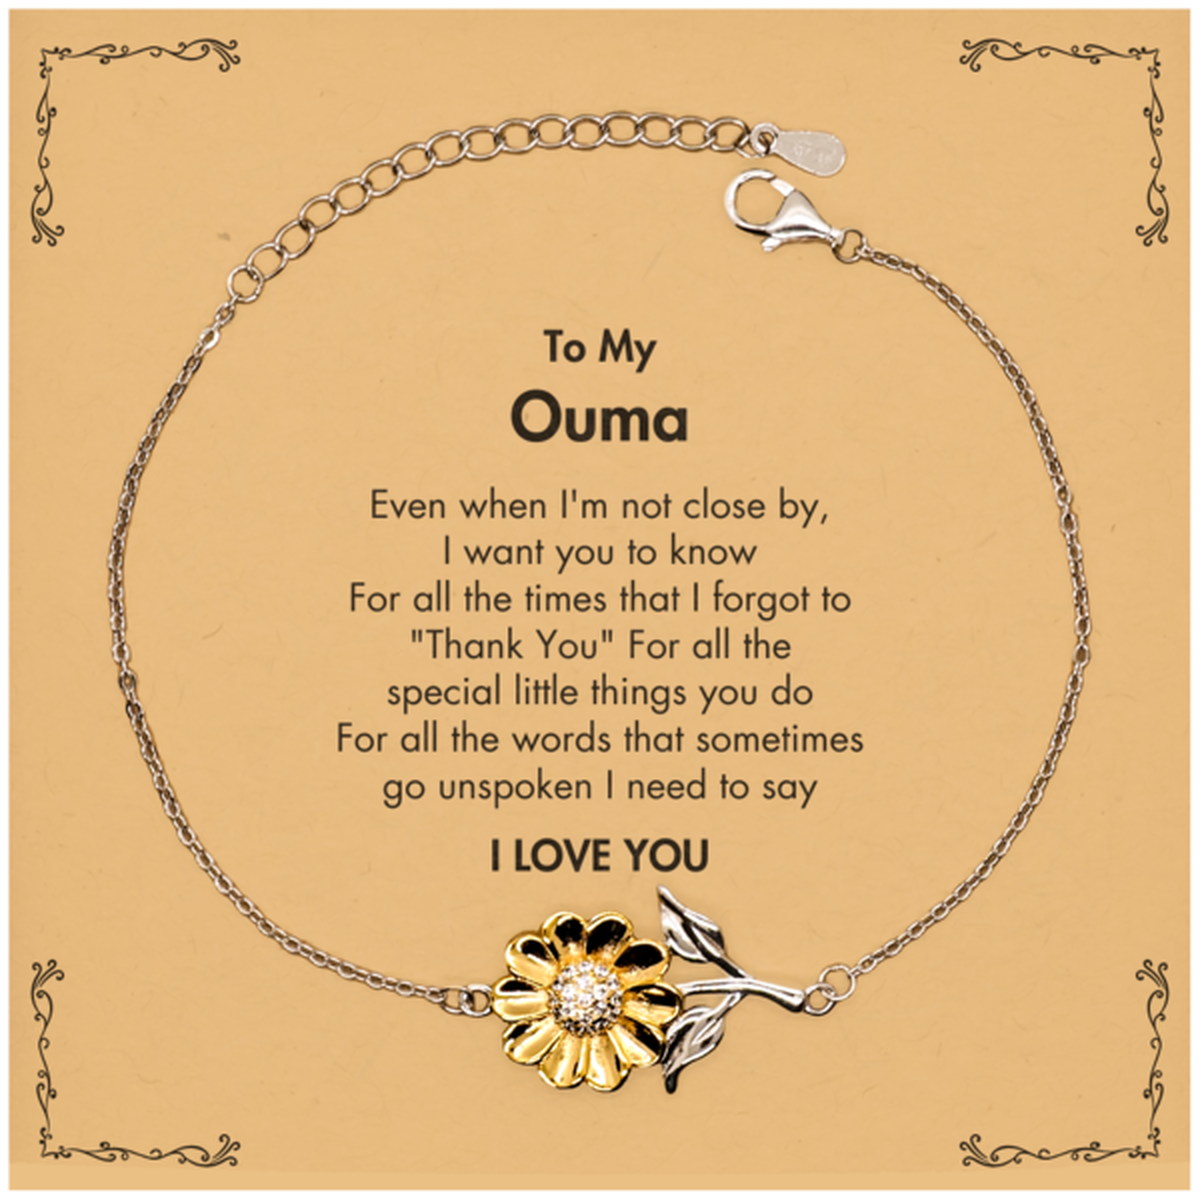 Thank You Gifts for Ouma, Keepsake Sunflower Bracelet Gifts for Ouma Birthday Mother's day Father's Day Ouma For all the words That sometimes go unspoken I need to say I LOVE YOU